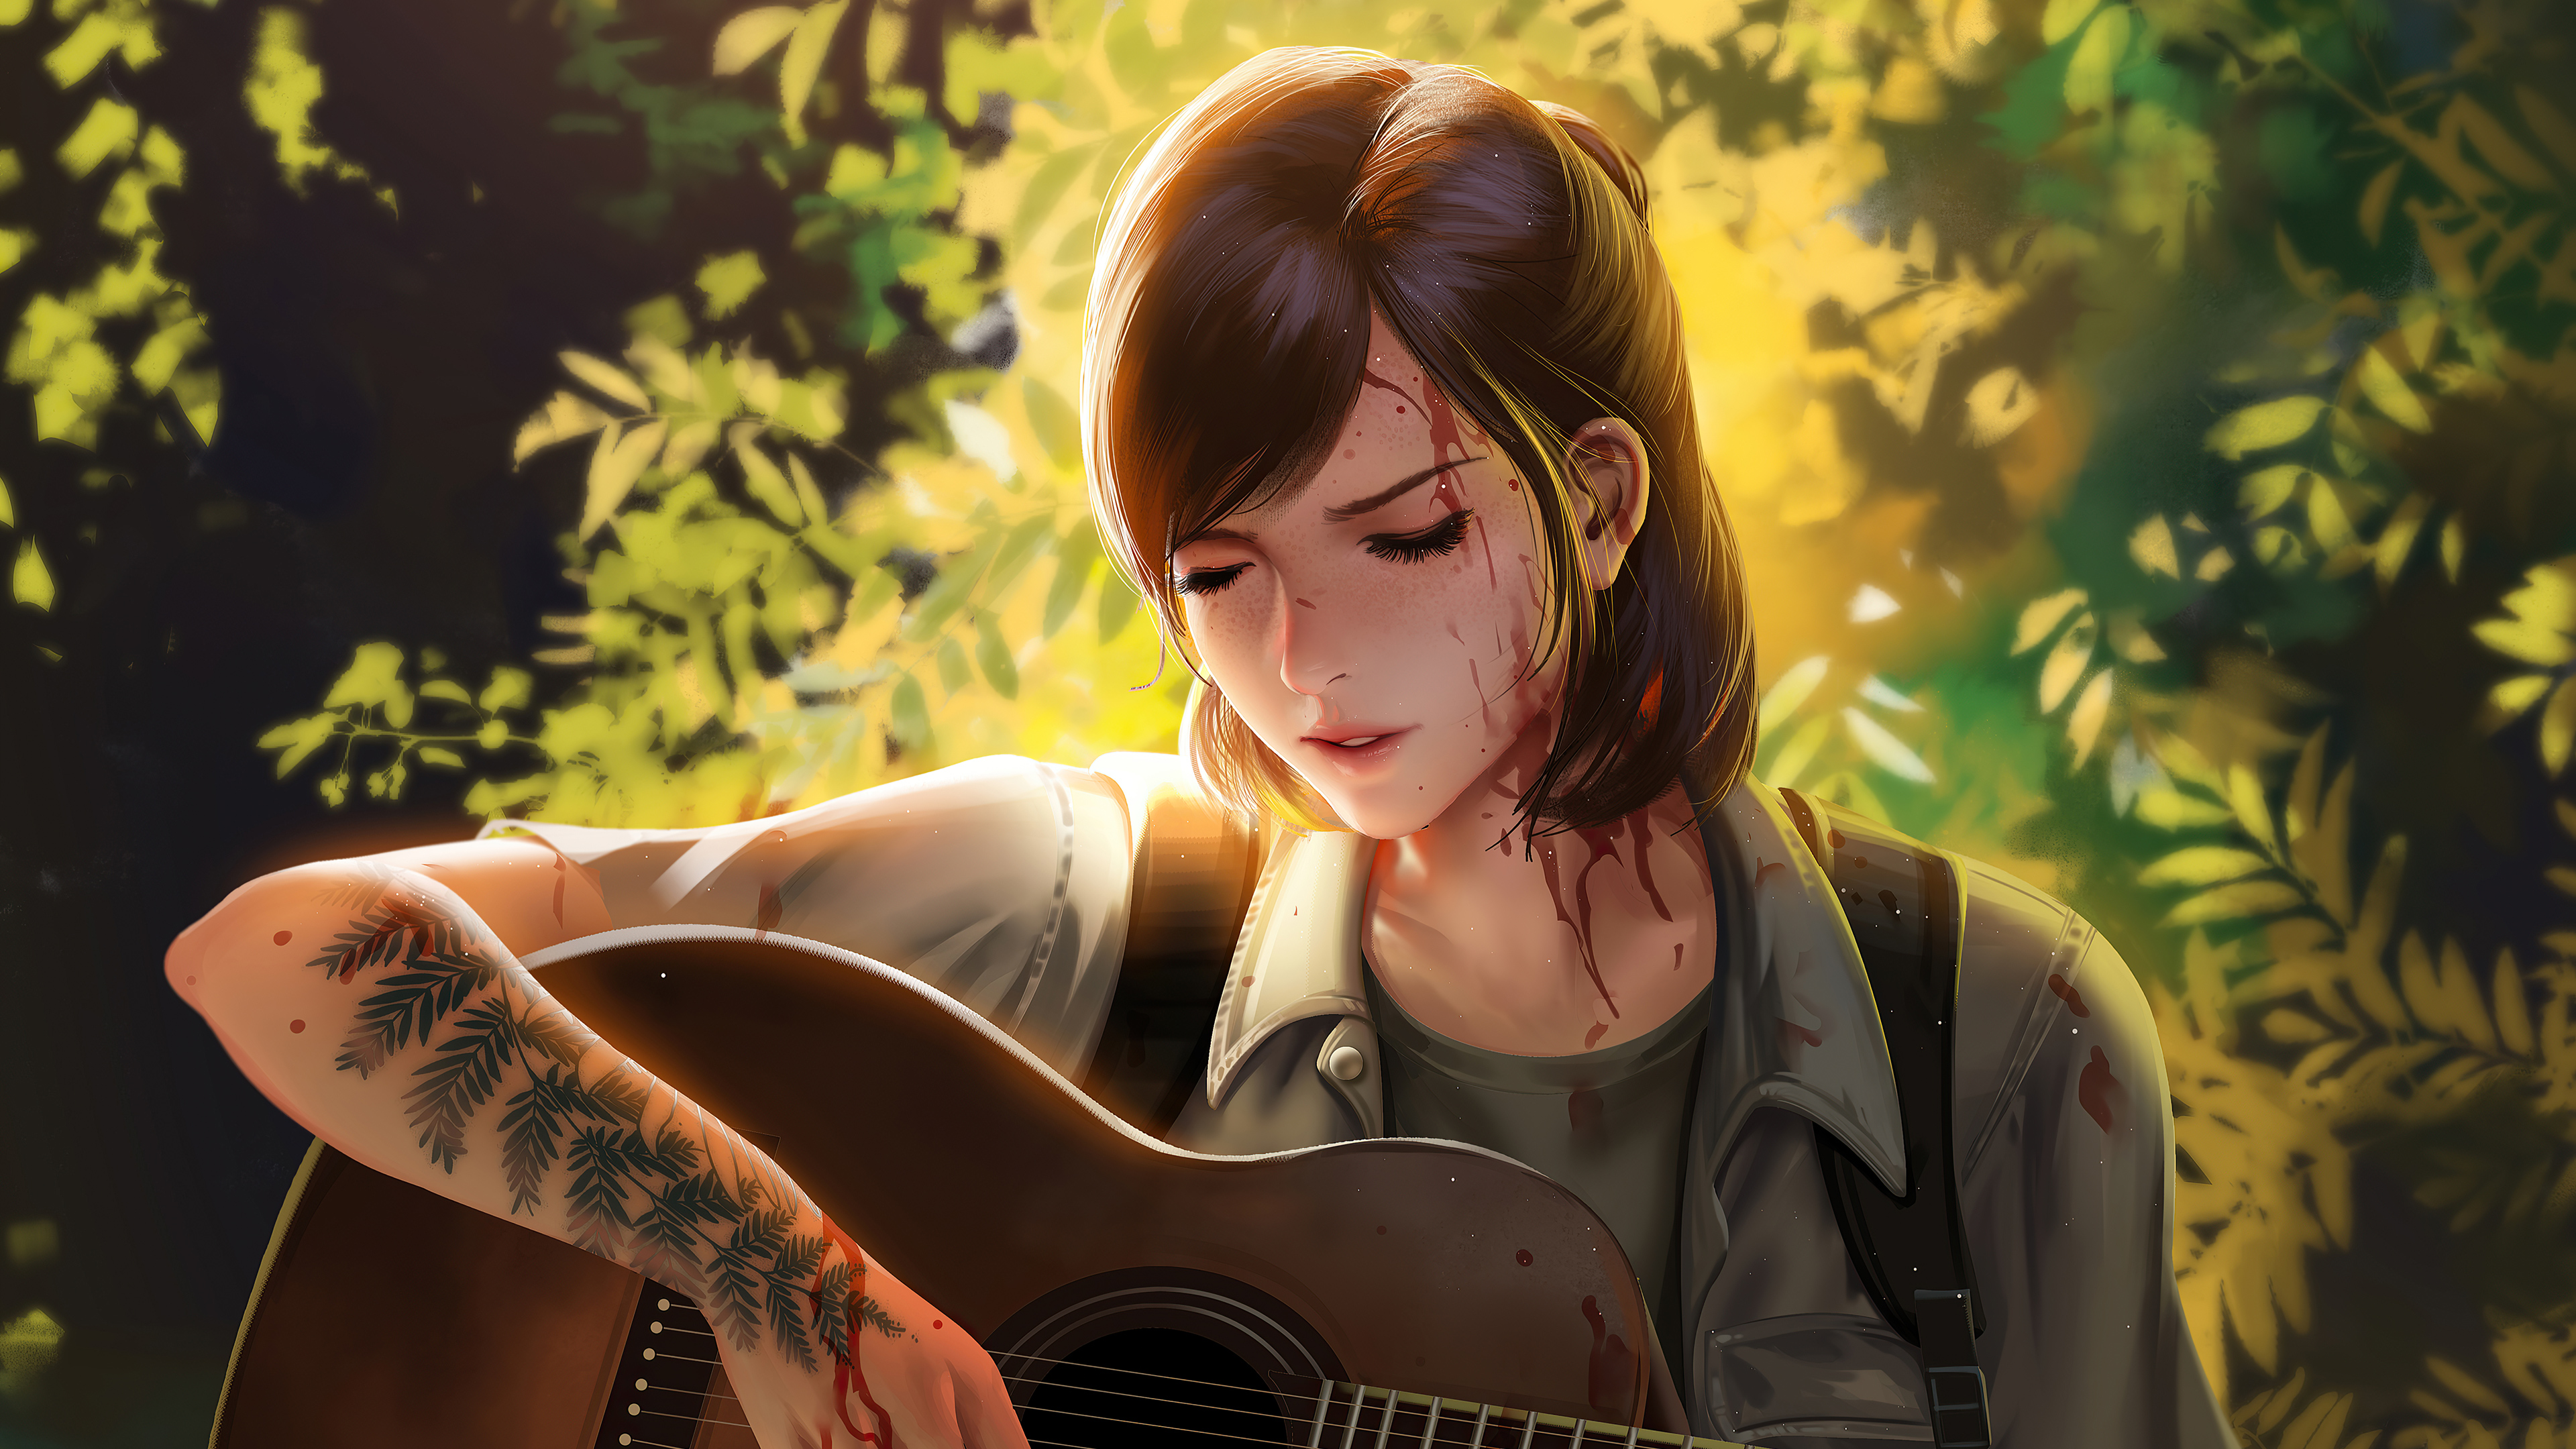 Ellie The Last Of Us Artwork 4k Wallpaper,HD Games Wallpapers,4k Wallpapers ,Images,Backgrounds,Photos and Pictures